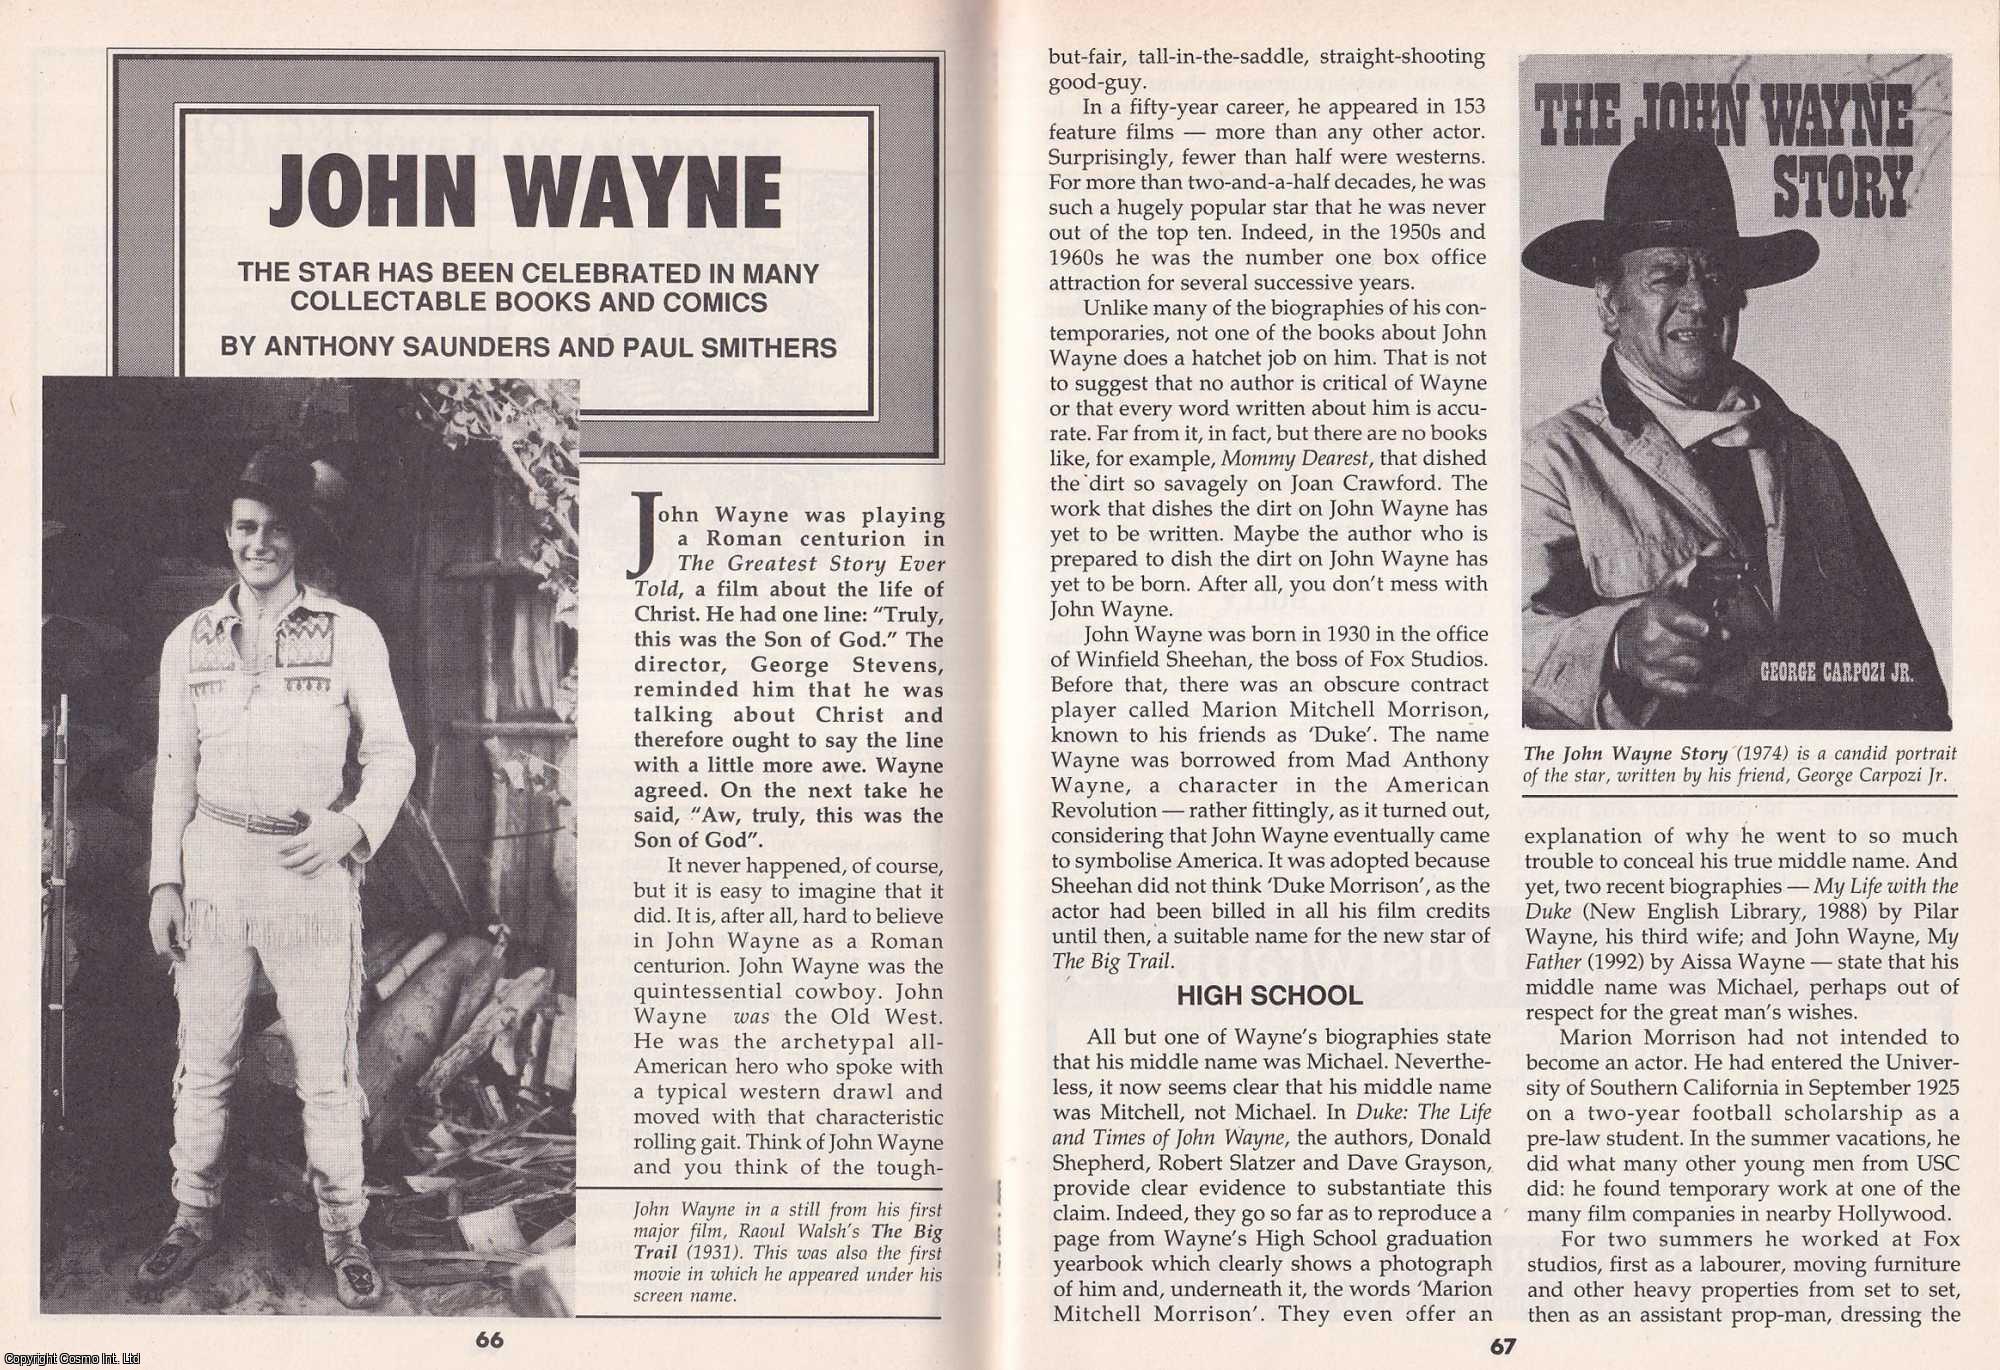 Anthony Saunders & Paul Smithers - John Wayne. The Star has been Celebrated in Many Collectable Books and Comics. This is an original article separated from an issue of The Book & Magazine Collector publication.